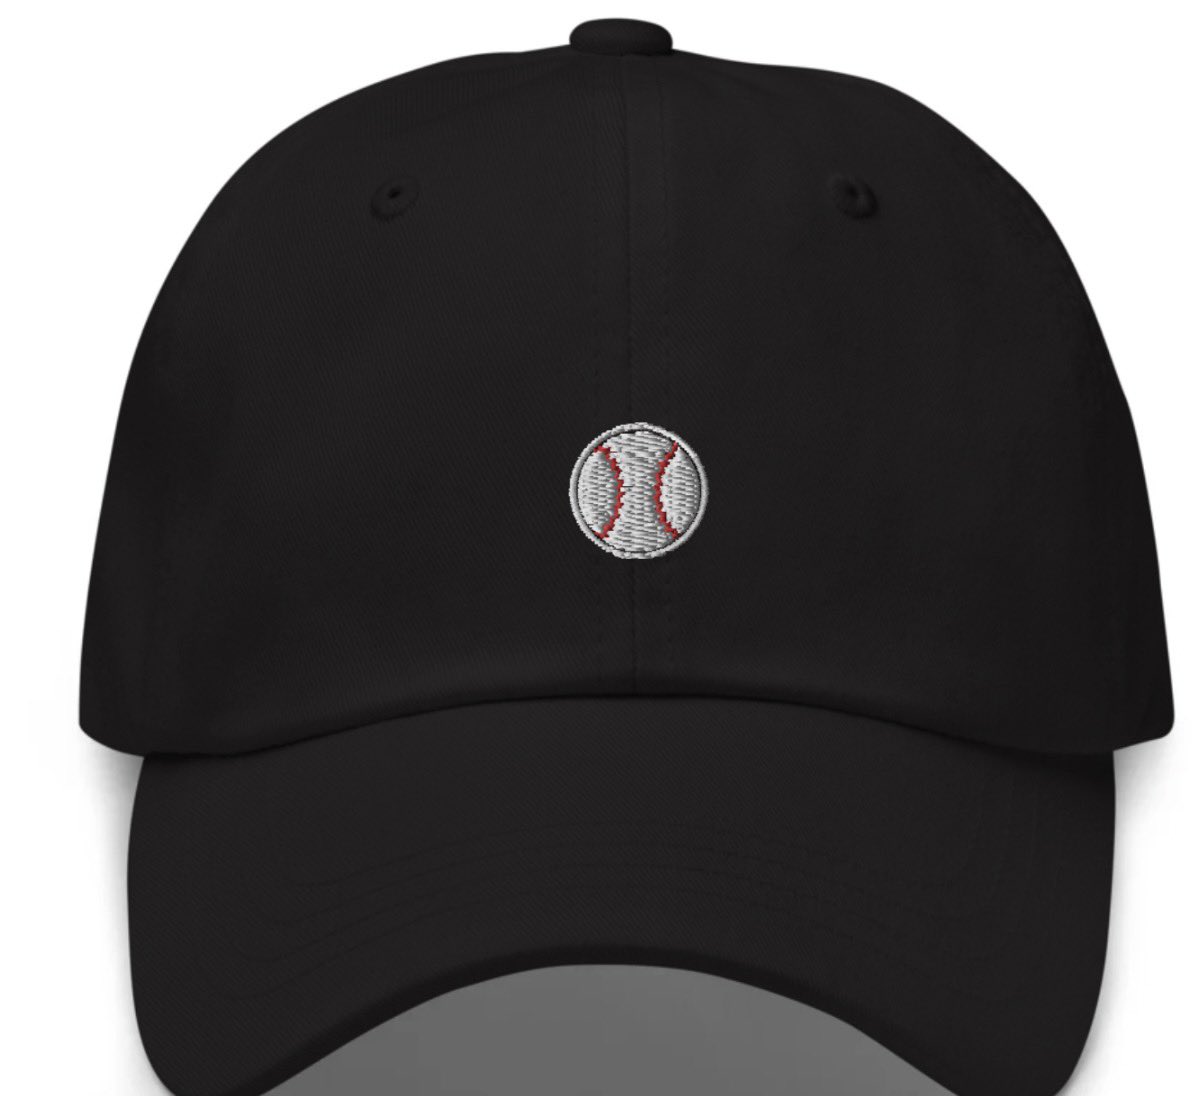 Big Cat on X: New Dad Hats for Fathers Day are live. Straight and